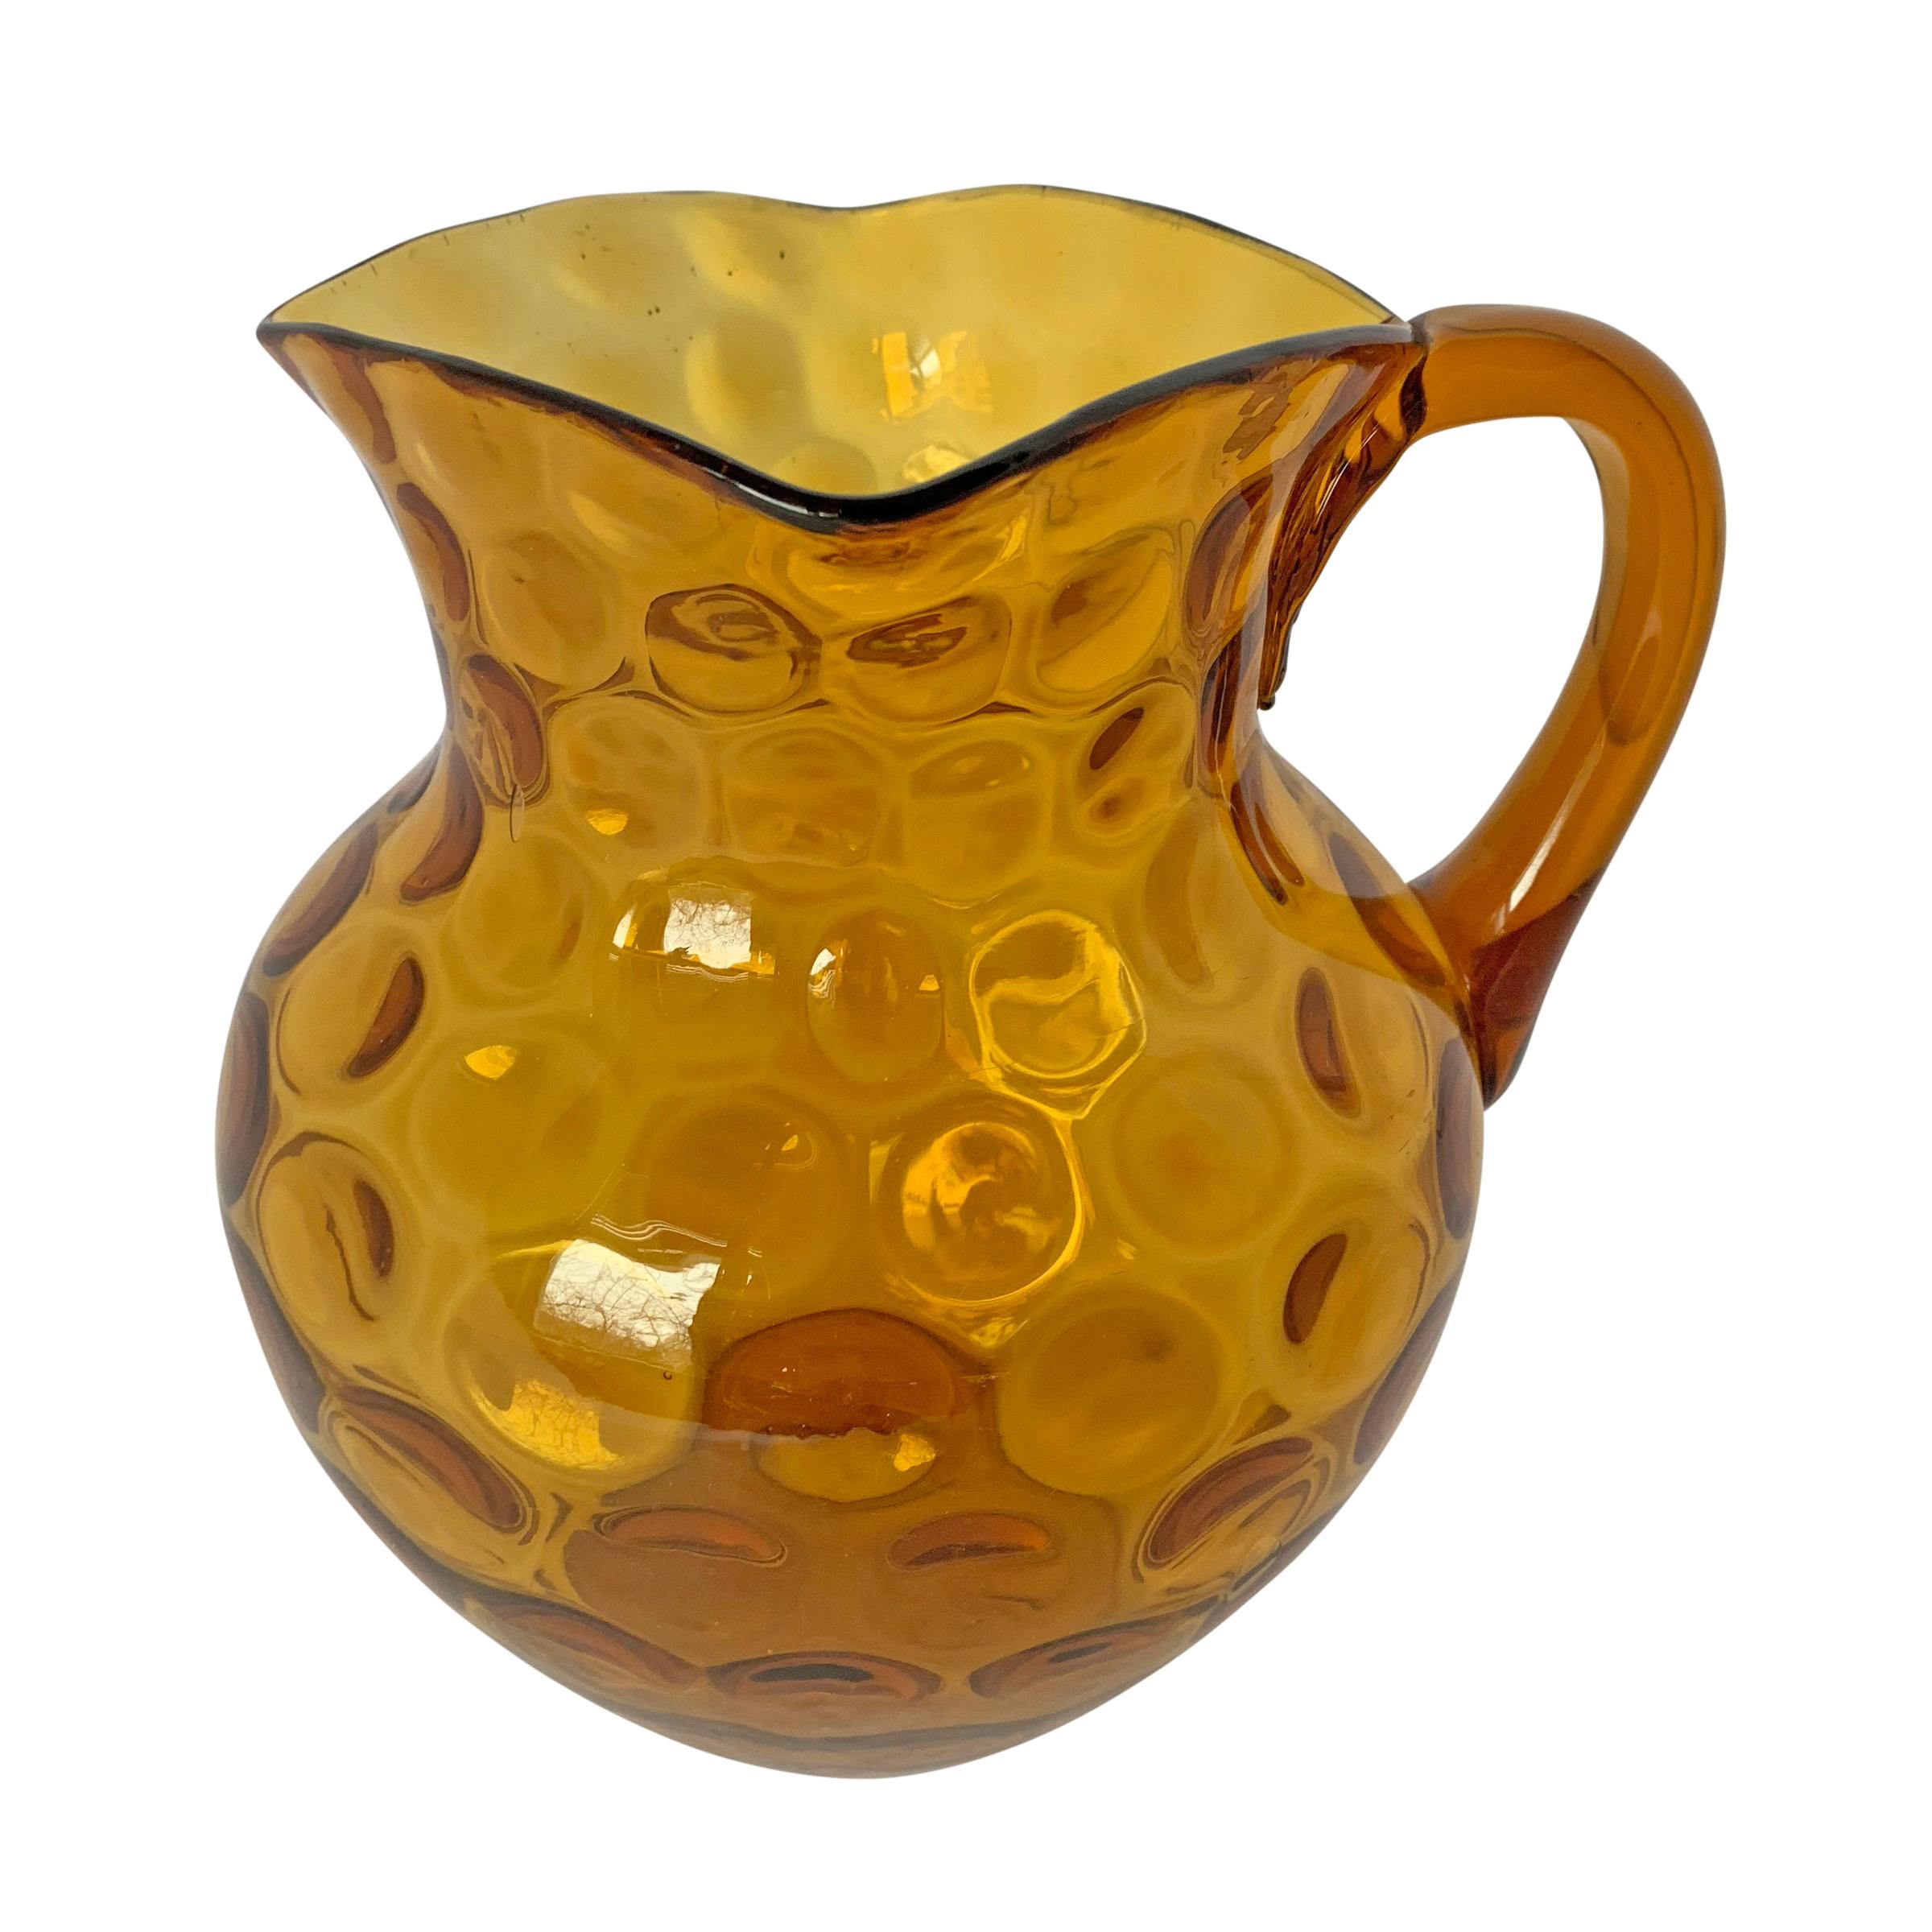 A fanciful early 20th century American amber glass pitcher covered polka dotted dimples with a pulled and applied handle. This pitcher also makes a beautiful flower vase.